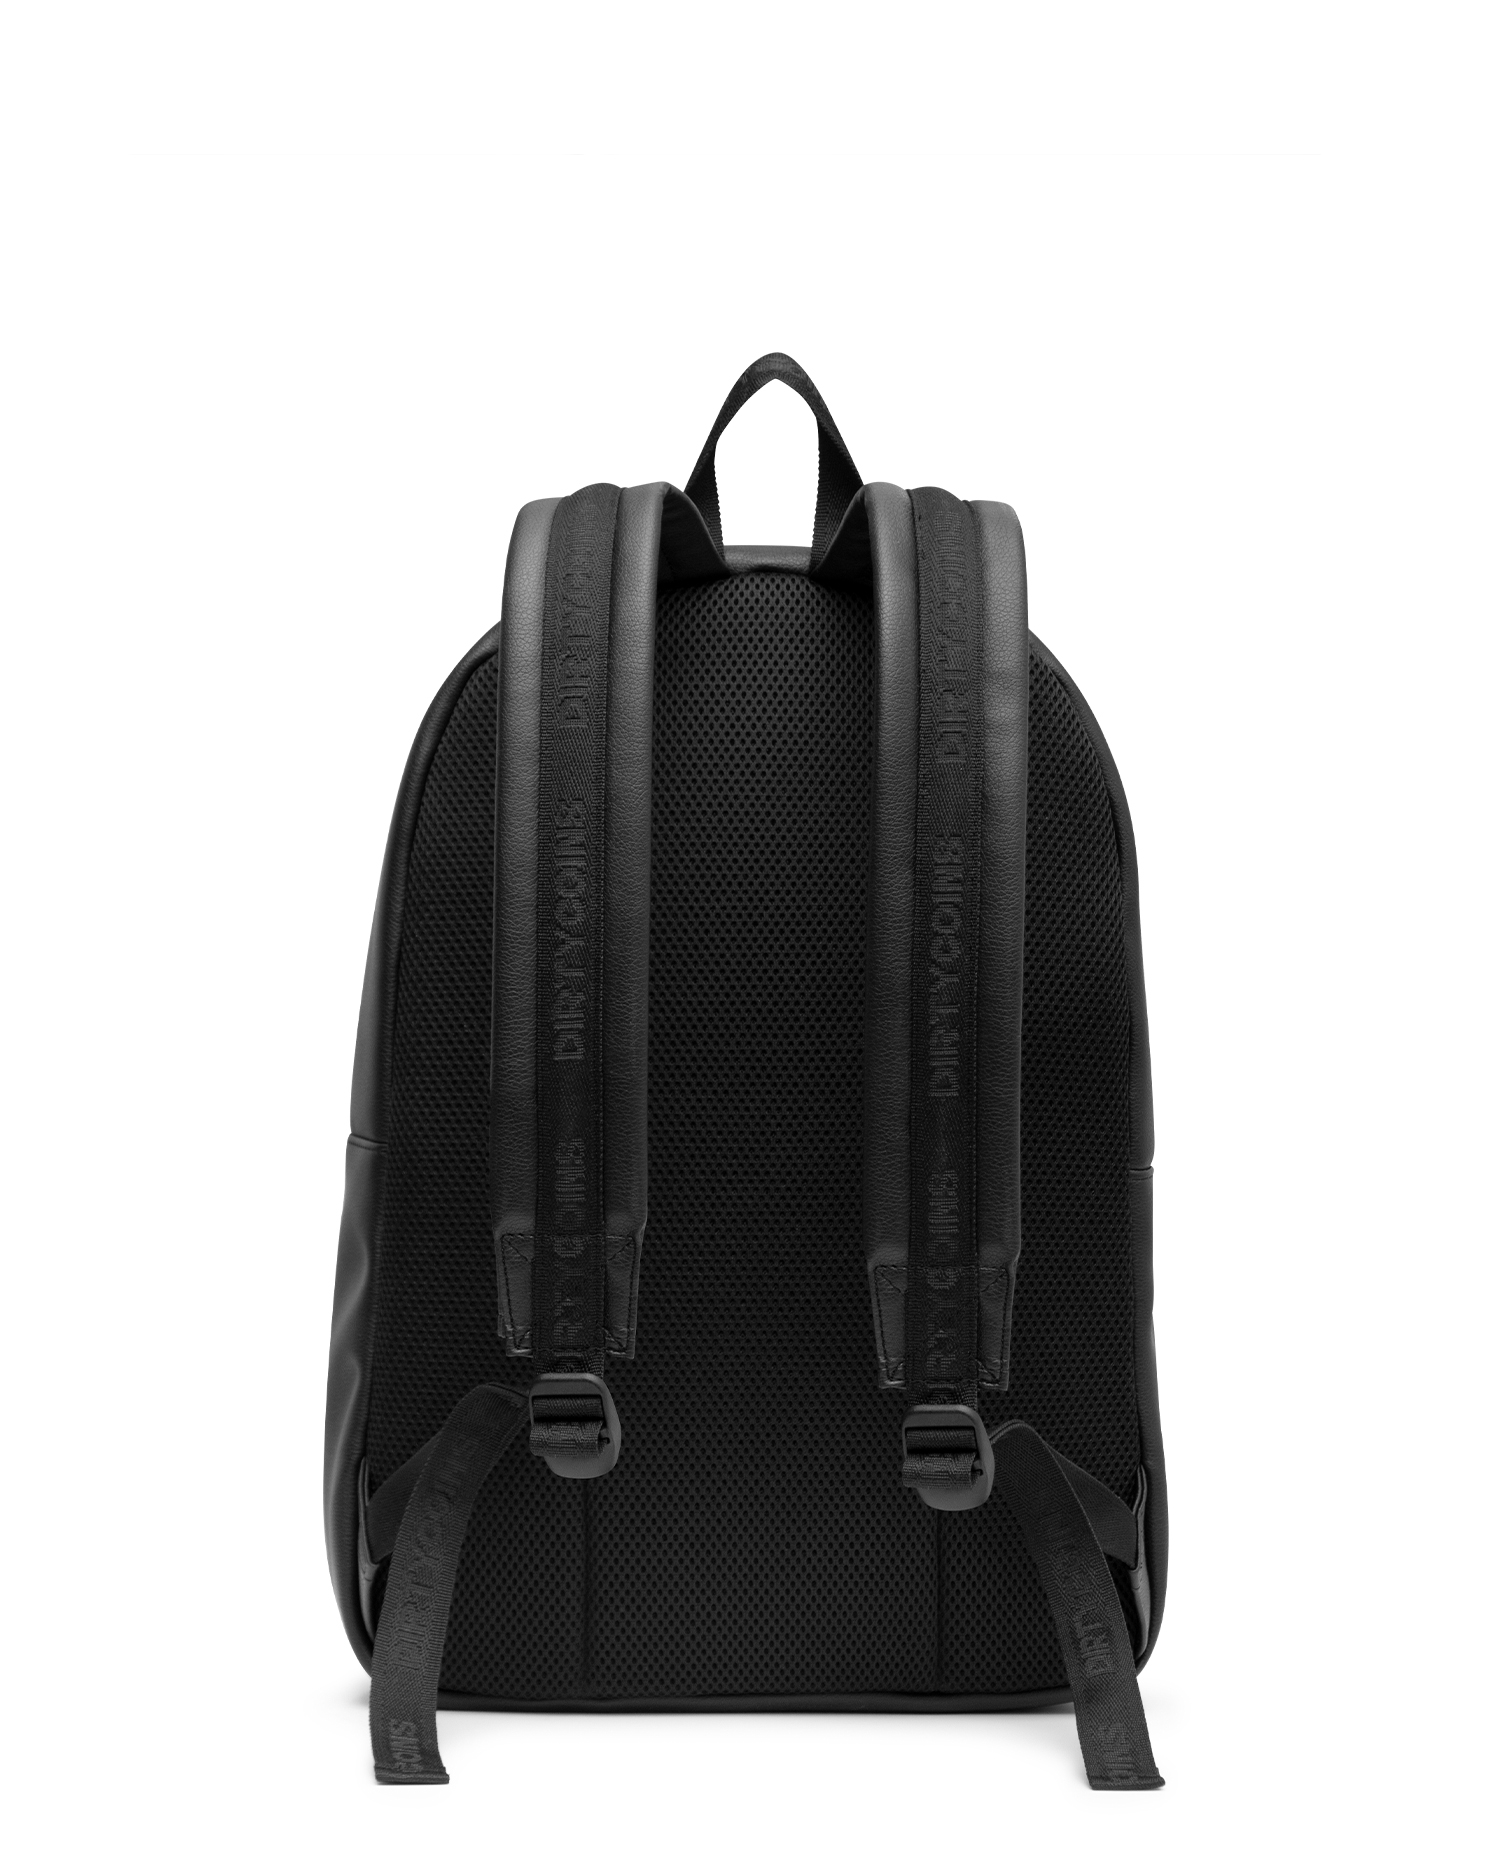 Dico Comfy Backpack